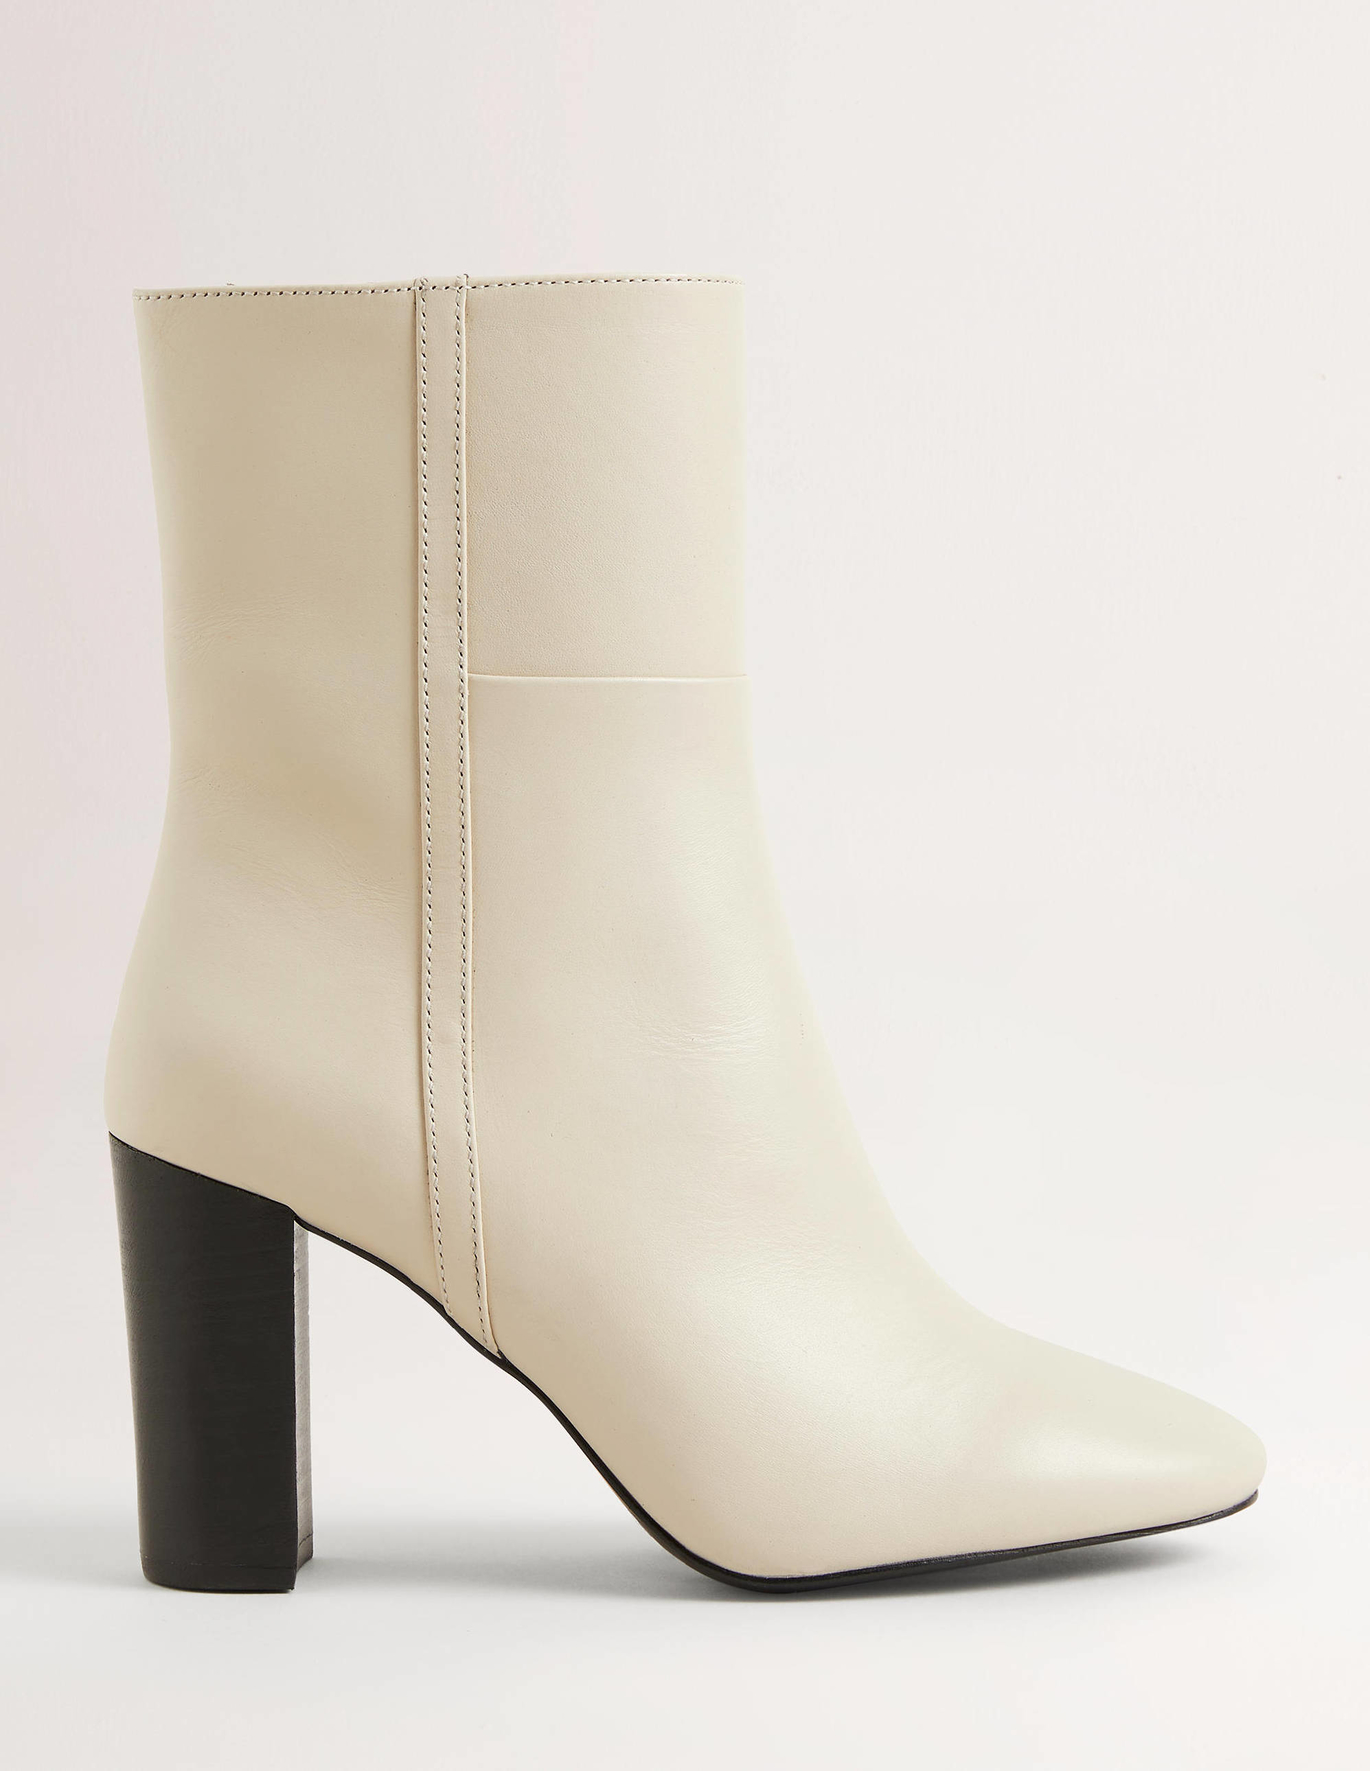 Boden Leather Ankle Boots - Off White